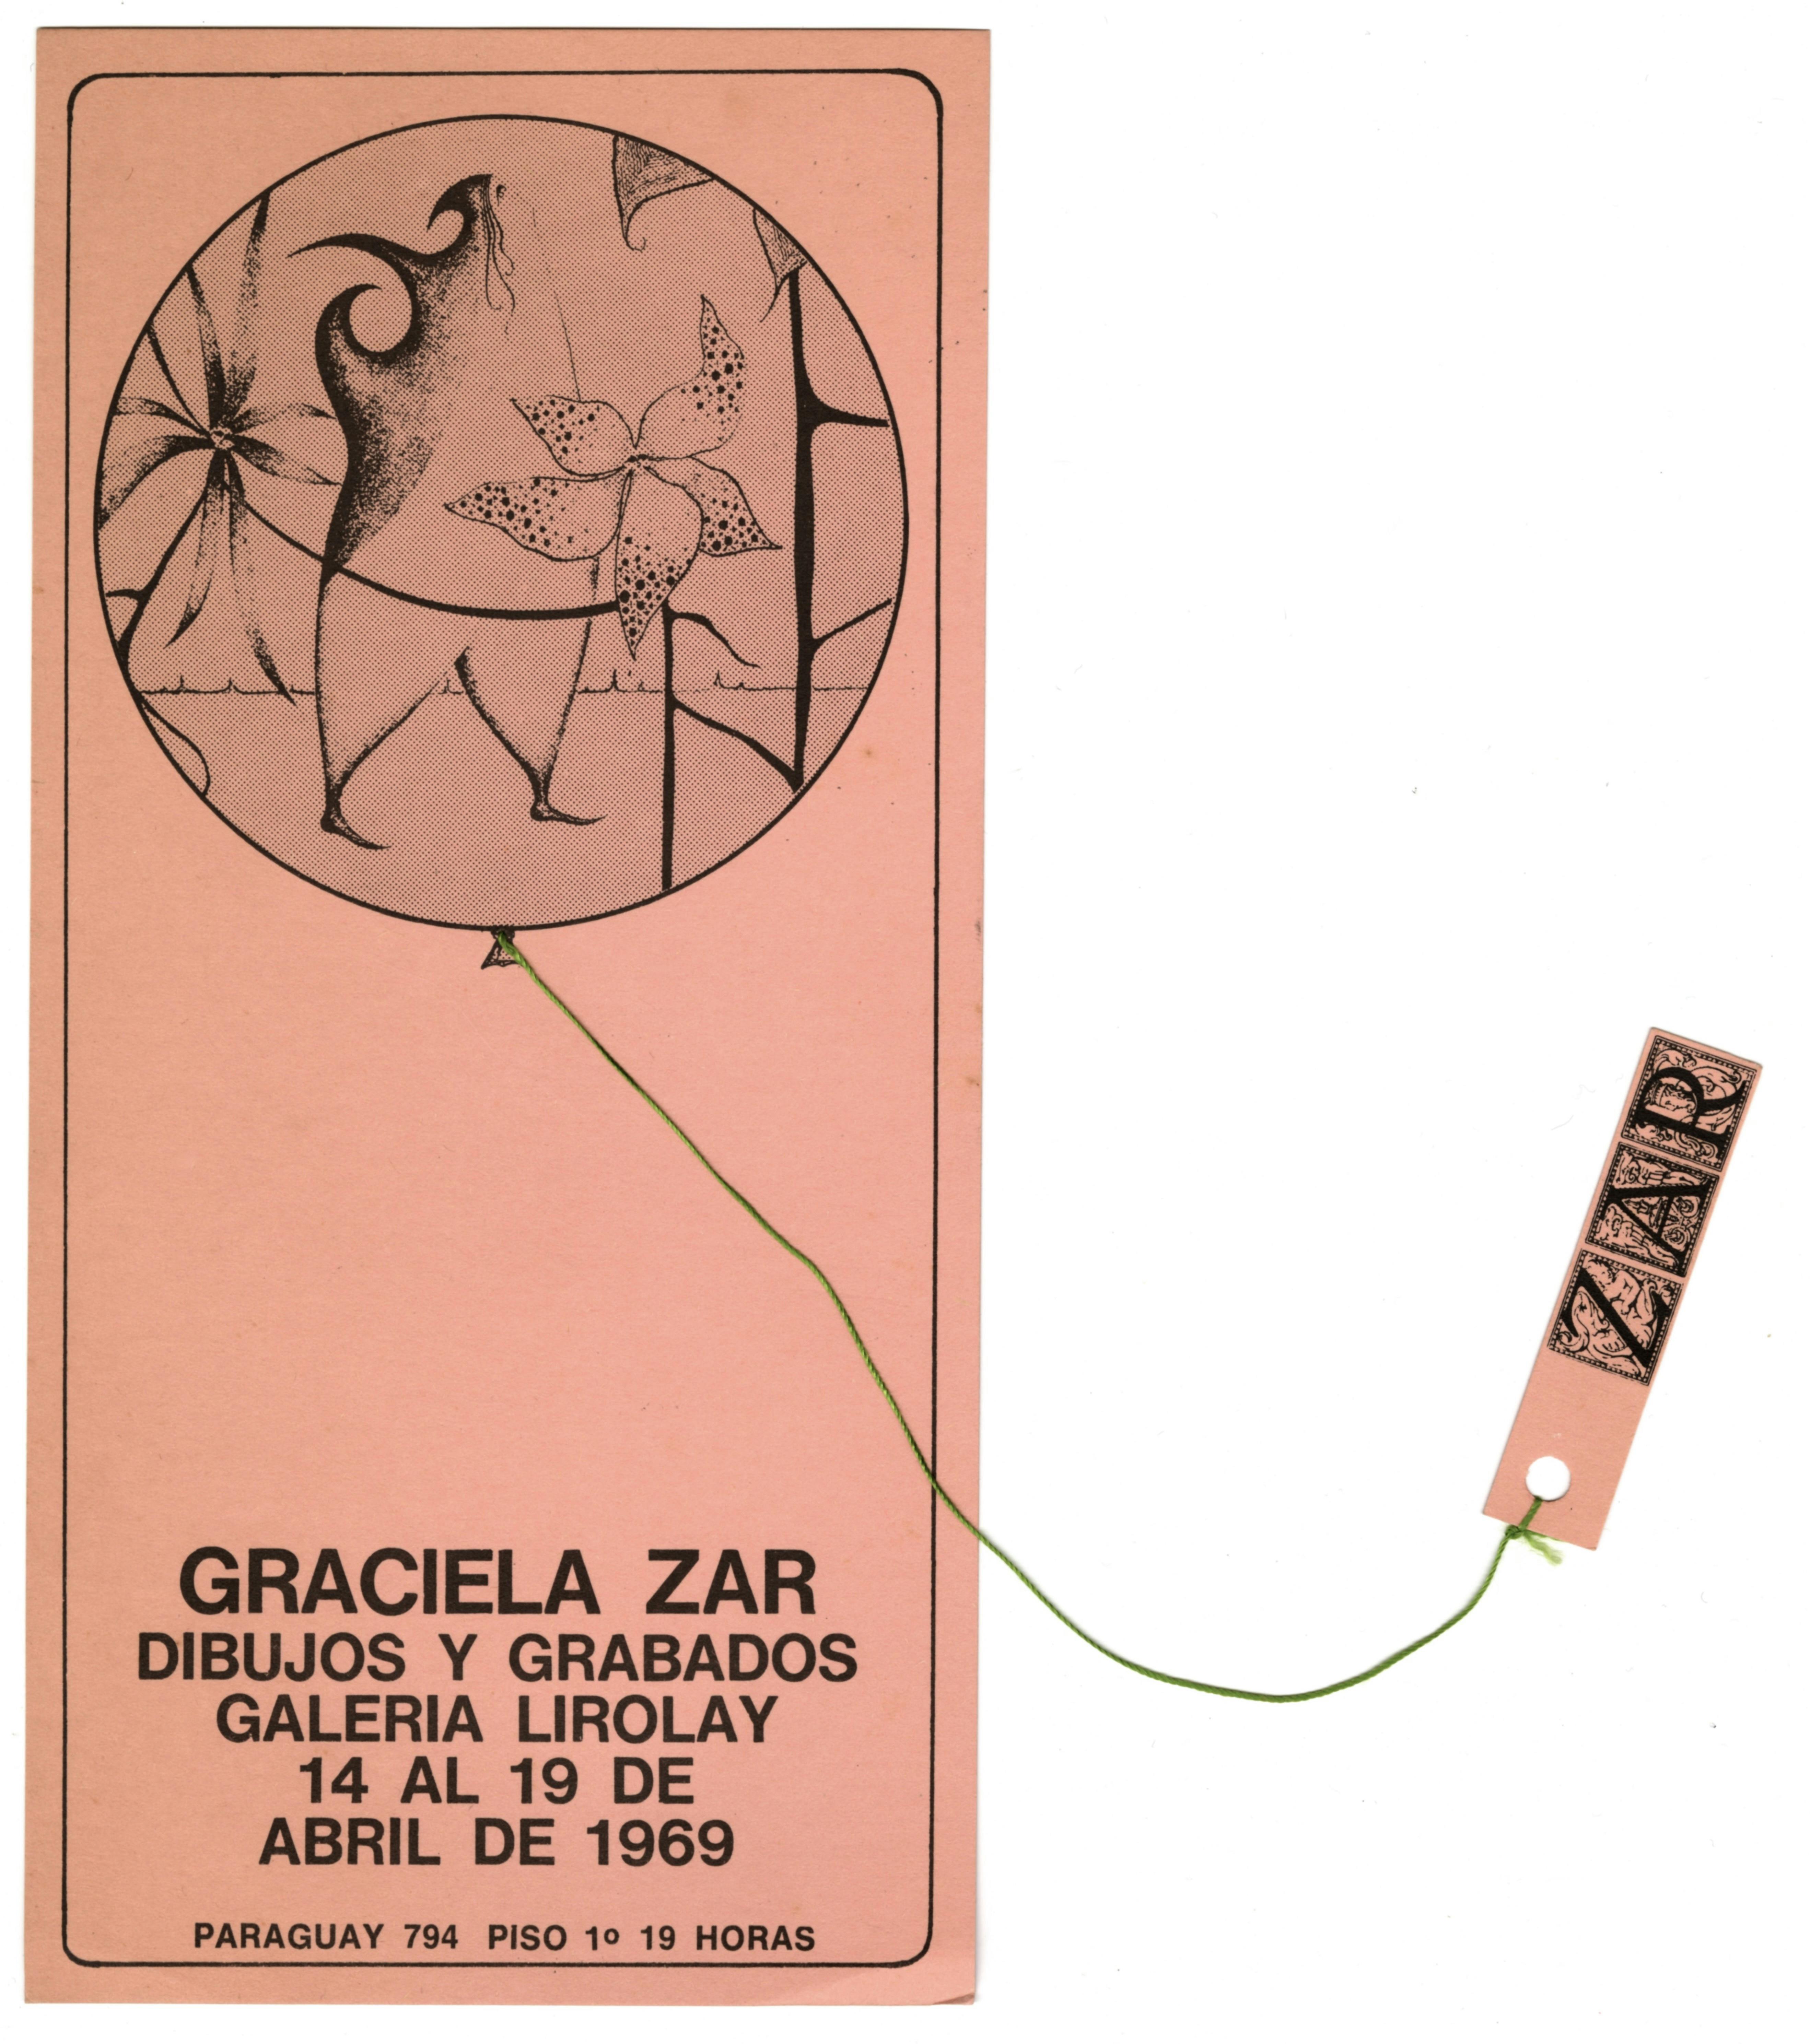 A vertical pink postcard printed with black images and text. In the upper half of the card there is a circular outline of a balloon, containing anthropomorphic floral drawings. A green thread emerges from the bottom center of the balloon, the other end of which is tethered via a hole-punch to a small rectangular piece of paper with the artist’s name printed in serif letters. These letters are set in tile-like frames with minute illustrations of figures. At the bottom of the postcard is printed the exhibition’s title, dates, and address.